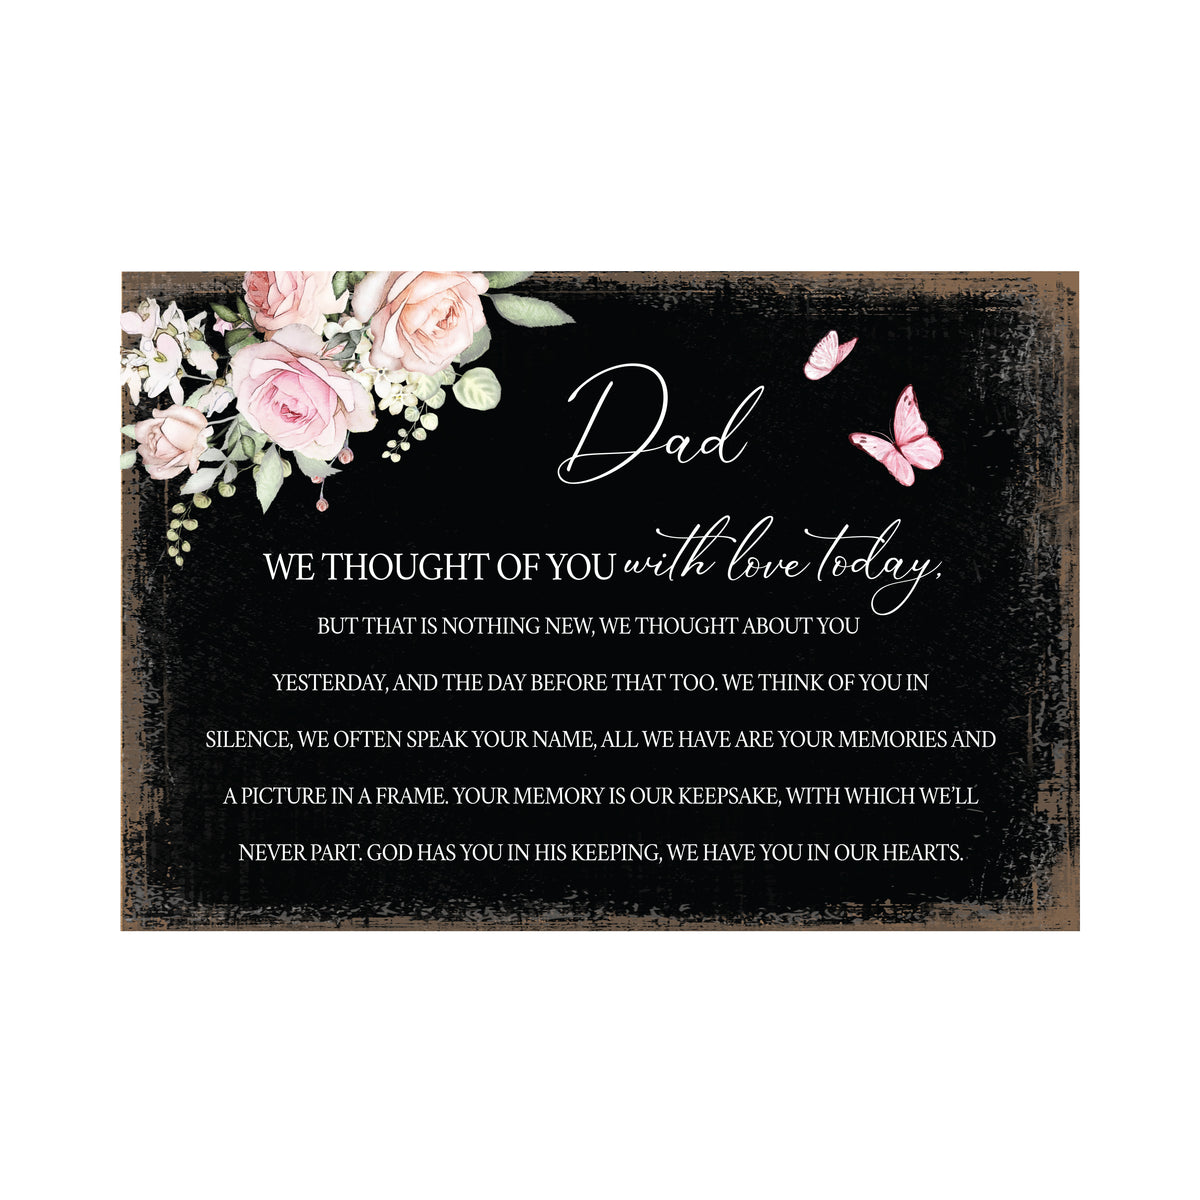 Someone We Love Wooden Floral 5.5x8 Inches Memorial Art Sign Table Top and shelf decor For Home Décor